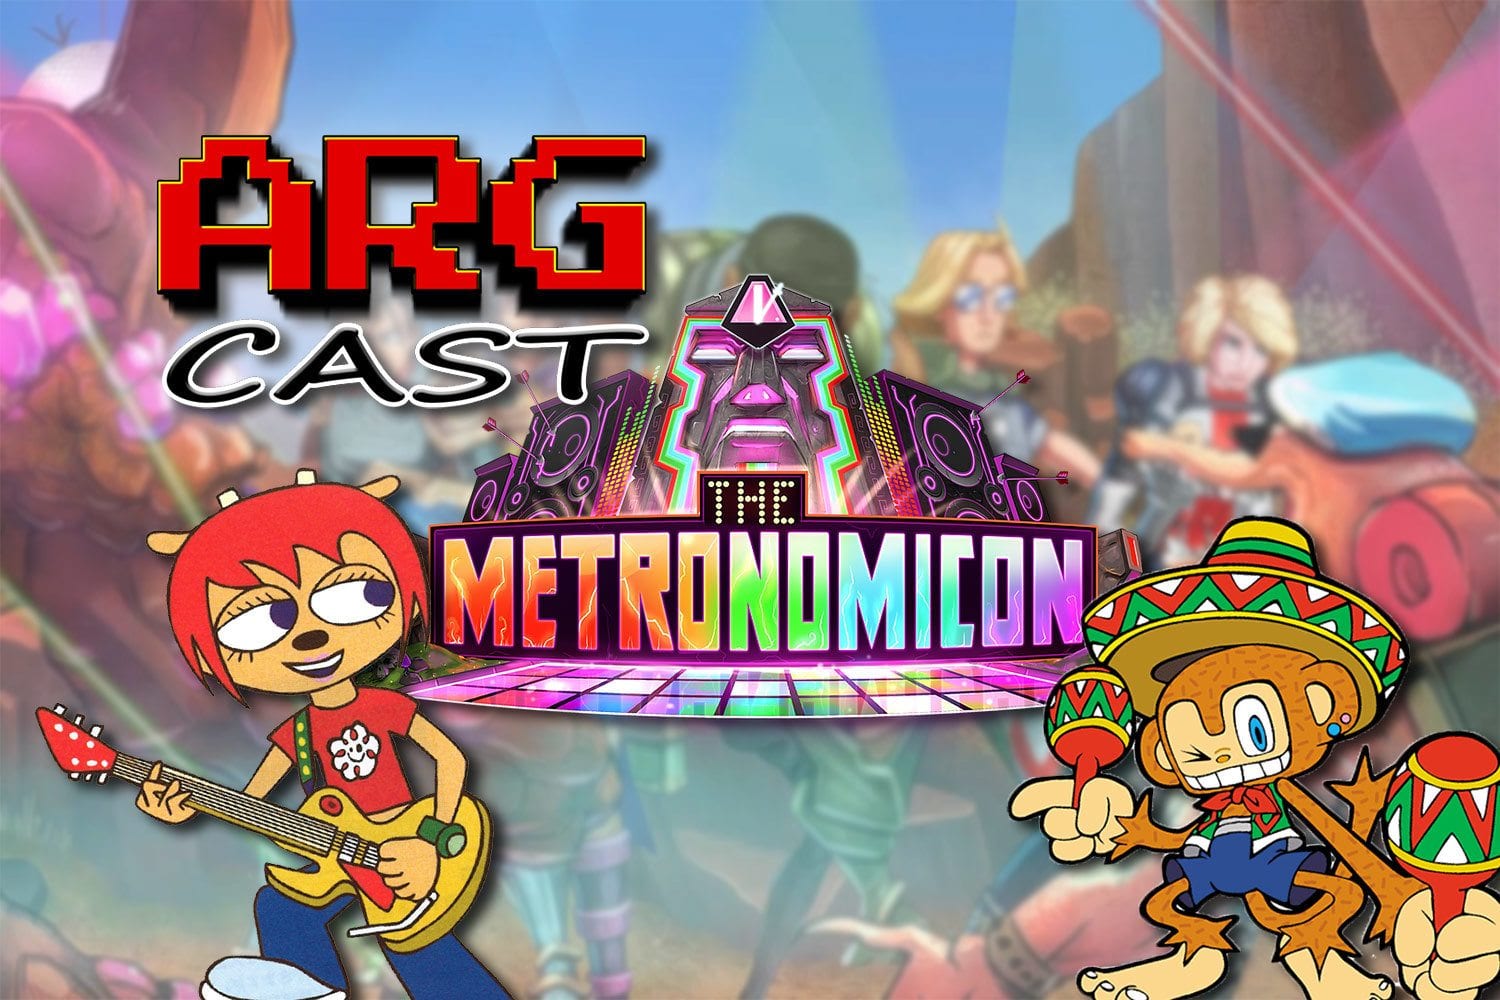 ARGcast #72: Dancing All Night in The Metronomicon with Danny Garfield